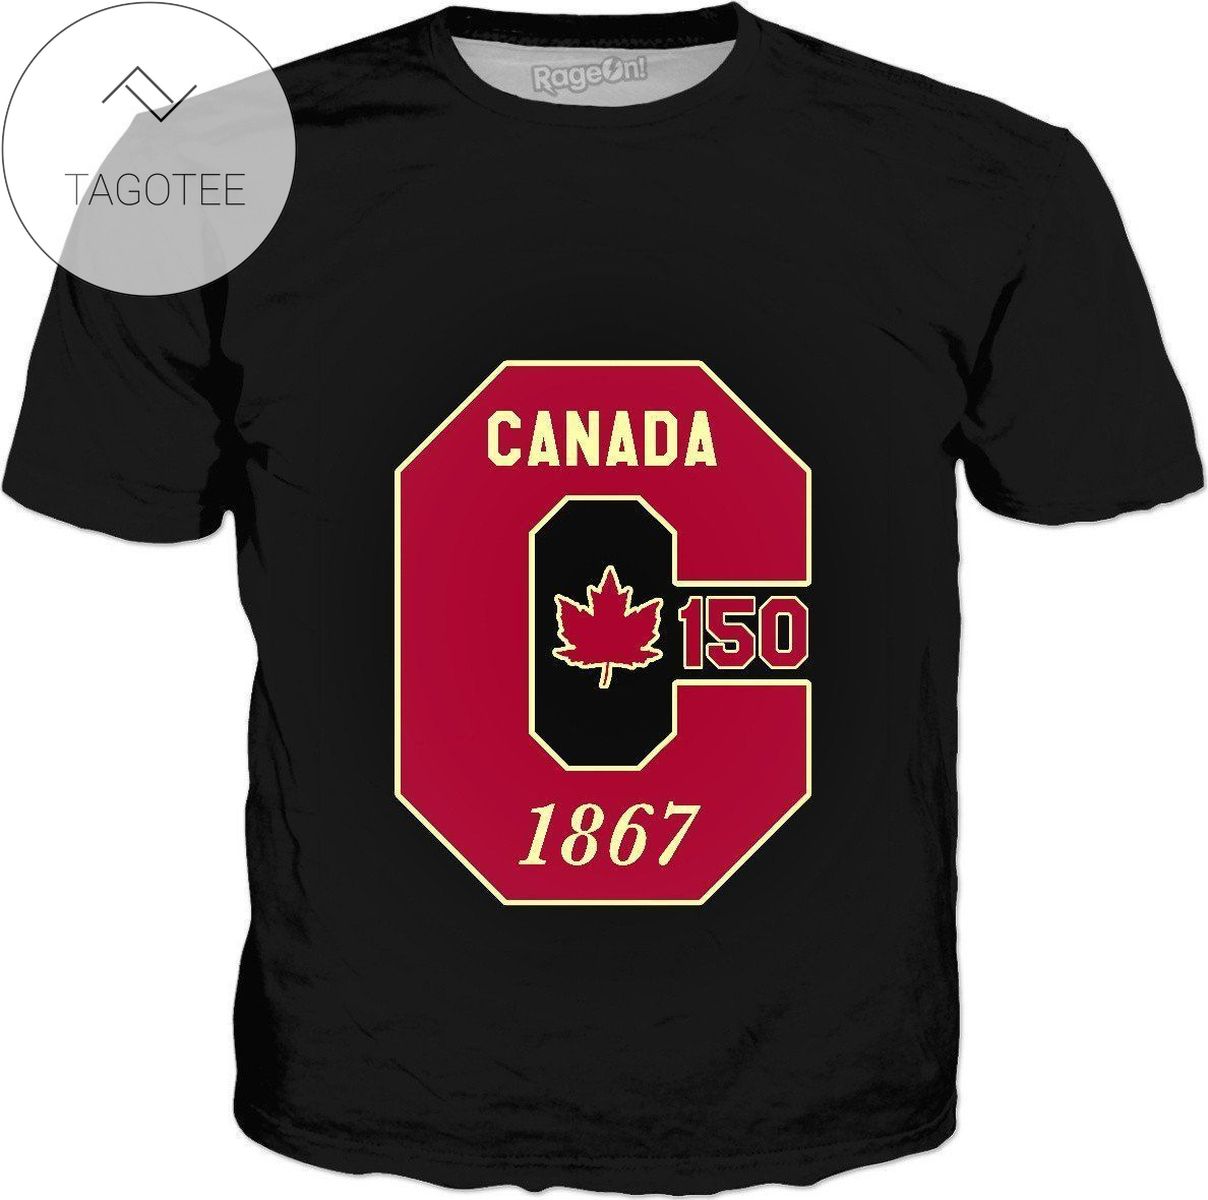 Rageon Canada 150th 1867 All Over Print T-shirt